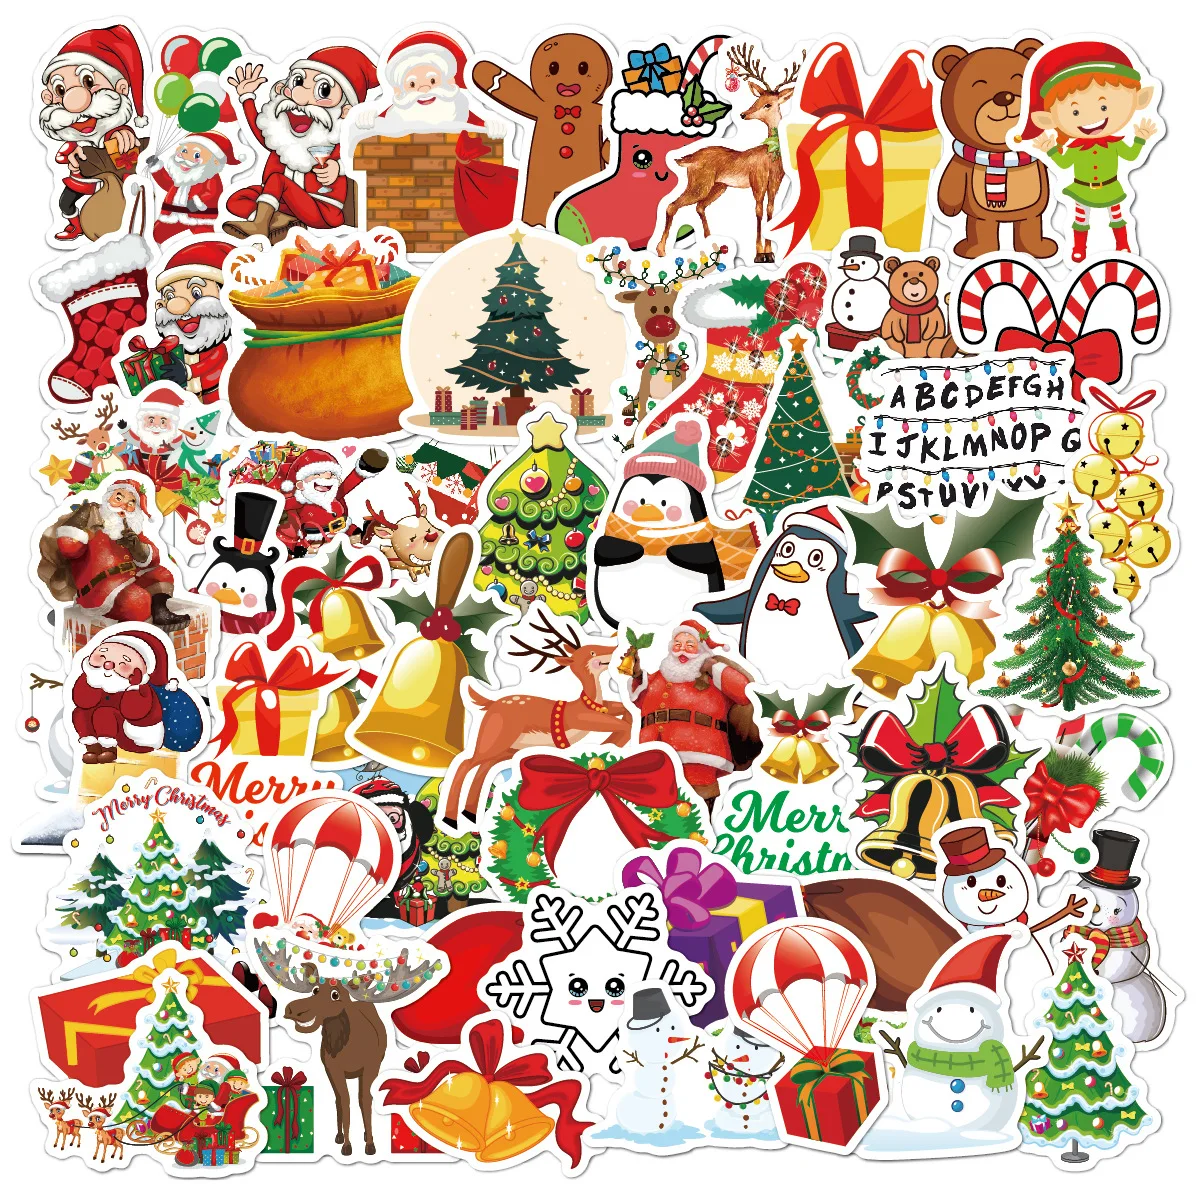 Graffiti Christmas Stickers Halloween Aesthetic Cute Window Door Party Stickers Home Decor Luggage Notebook Decoration Stickers